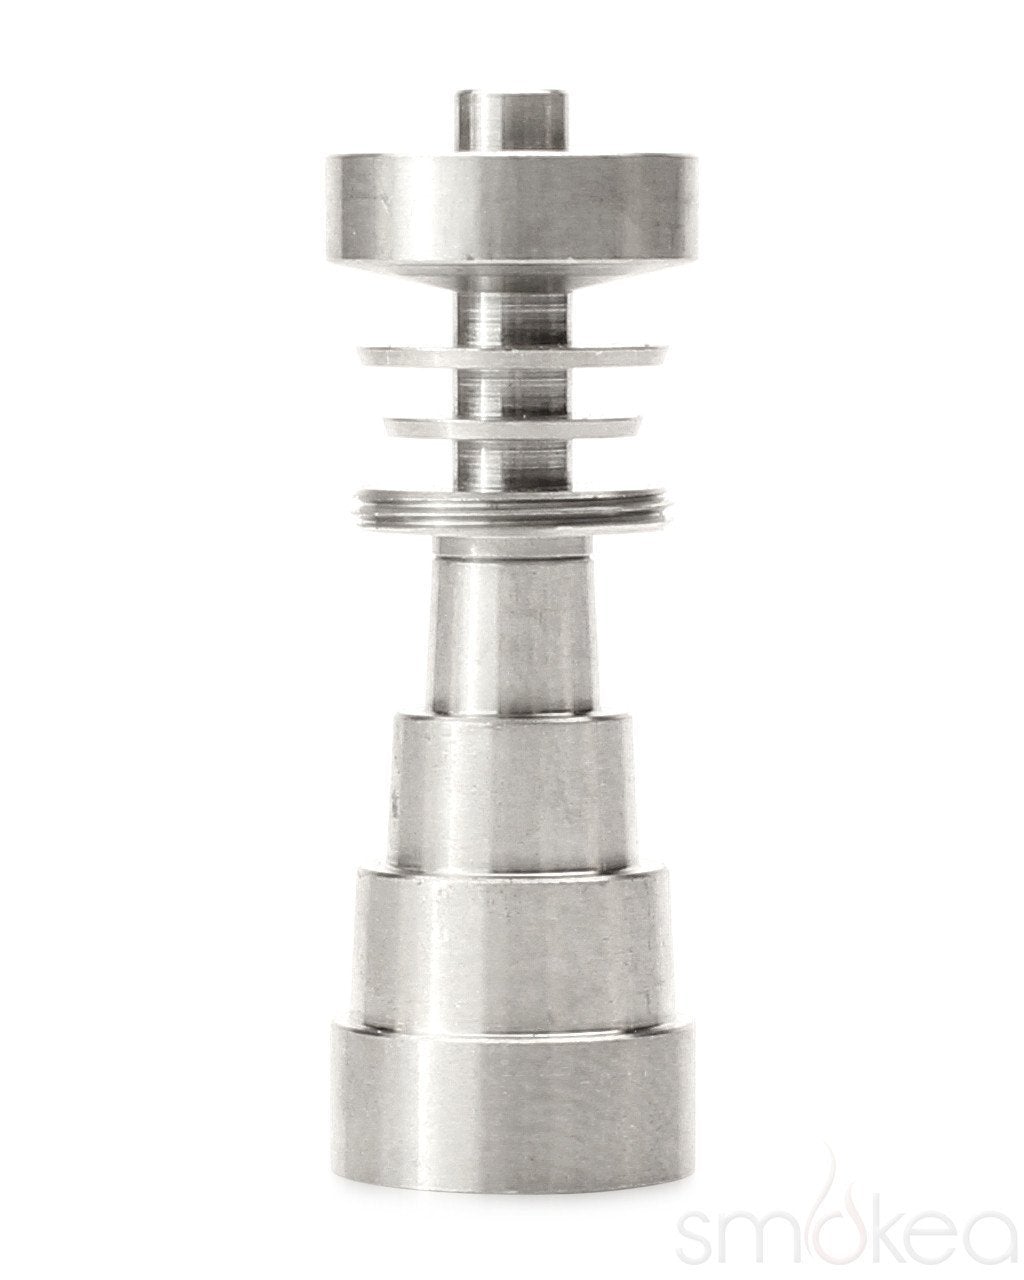 10mm Domeless – Highly Educated